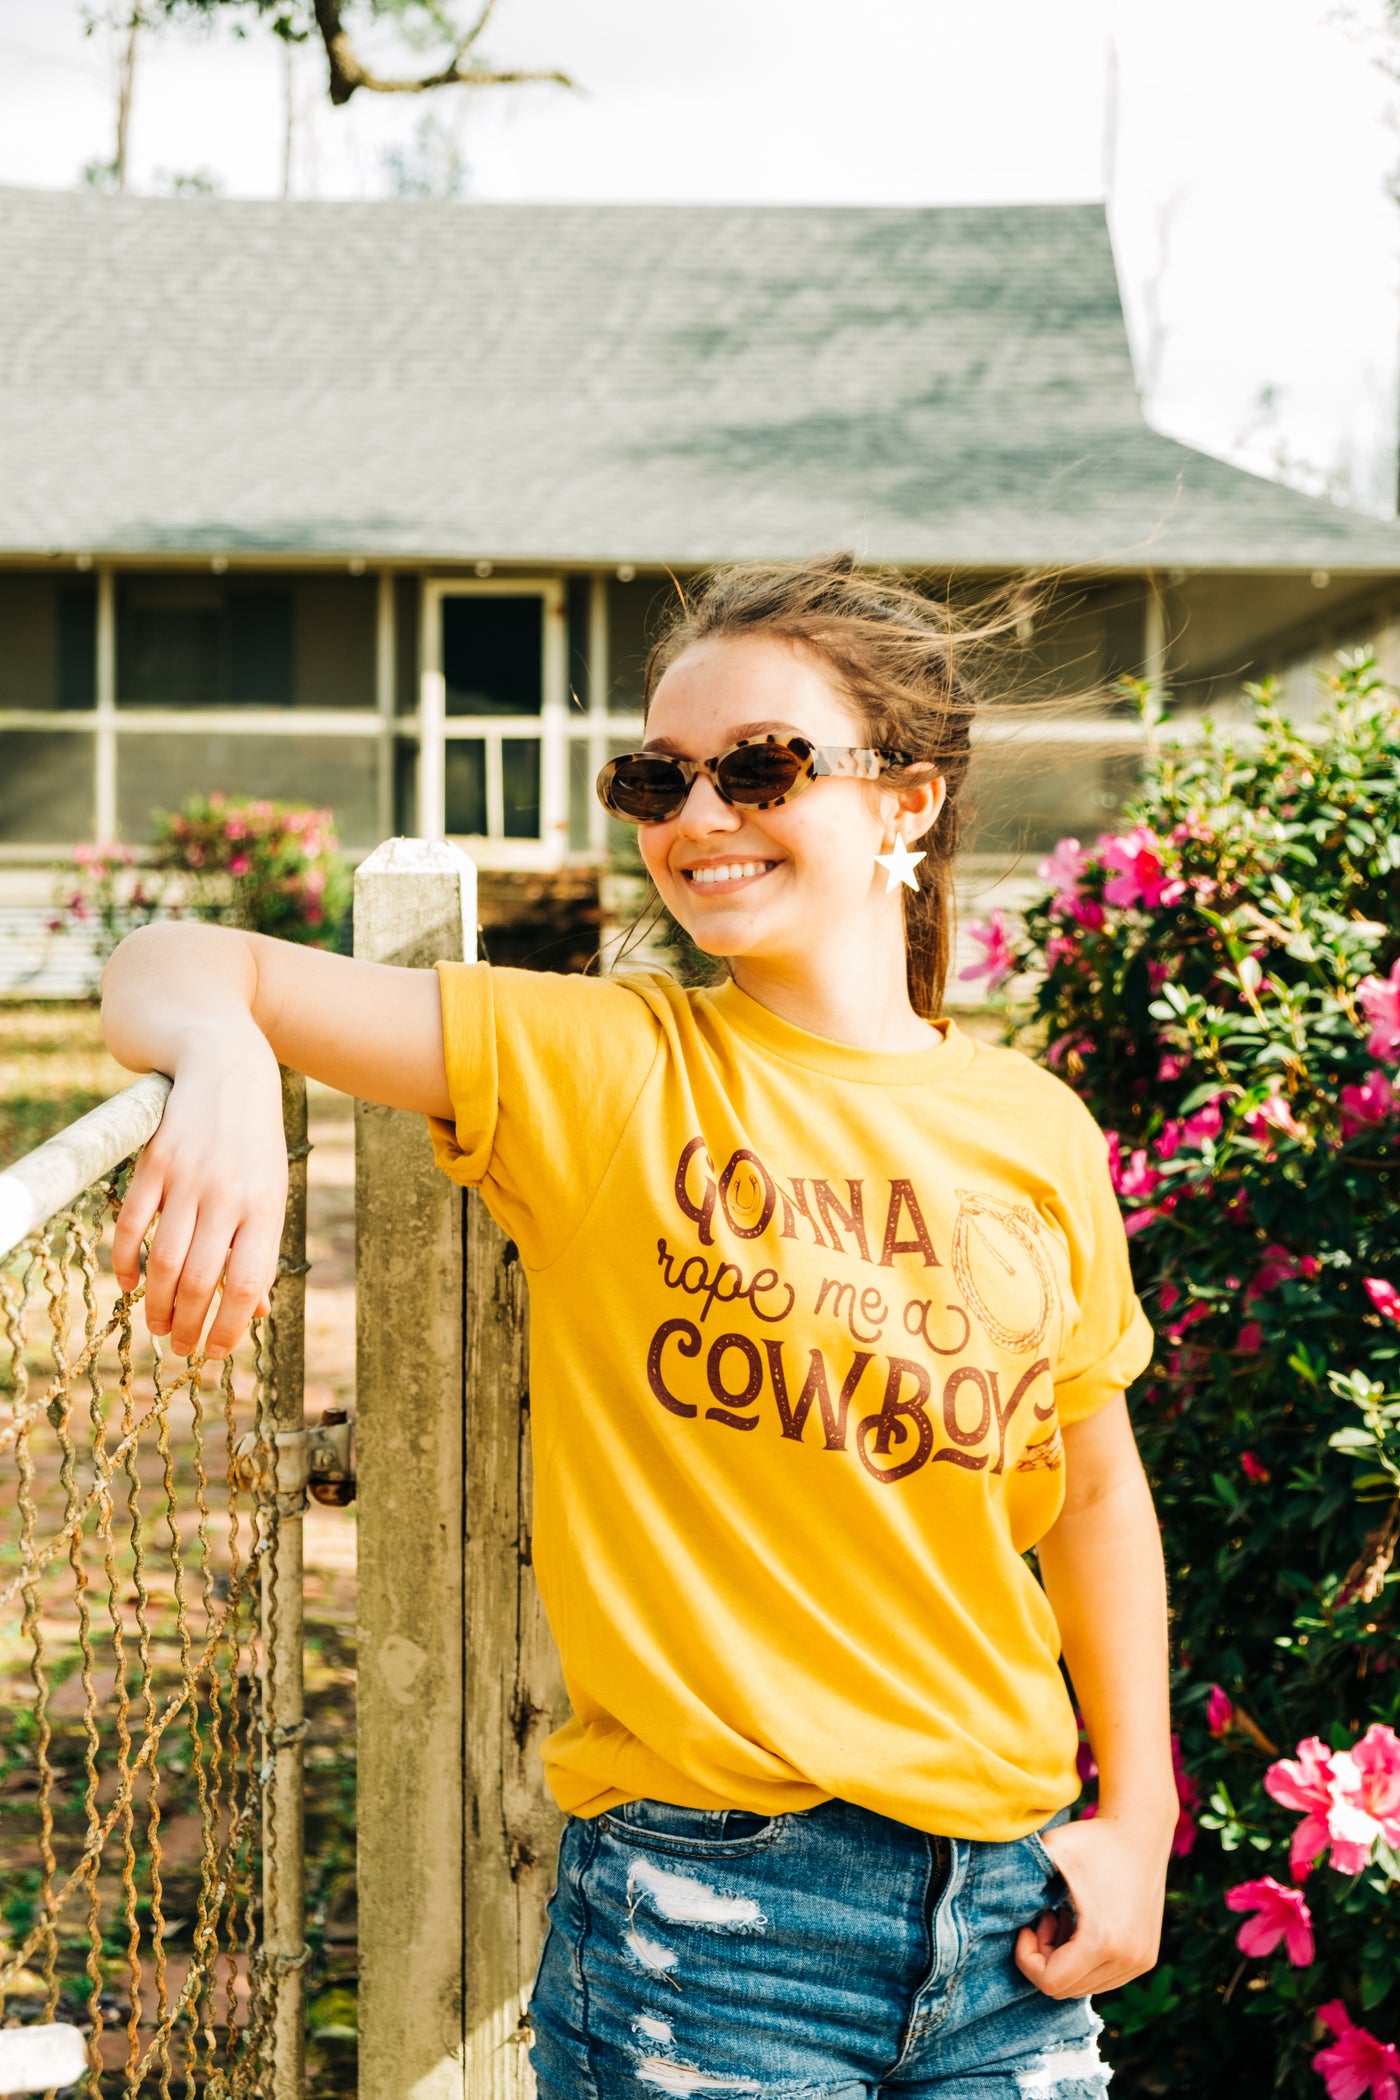 A yellow shirt with the words "Gonna Rope me a Cowboy" In a western font. In the O of gonna there is a horseshoe and to the right there is a rope and a cowboy boot.